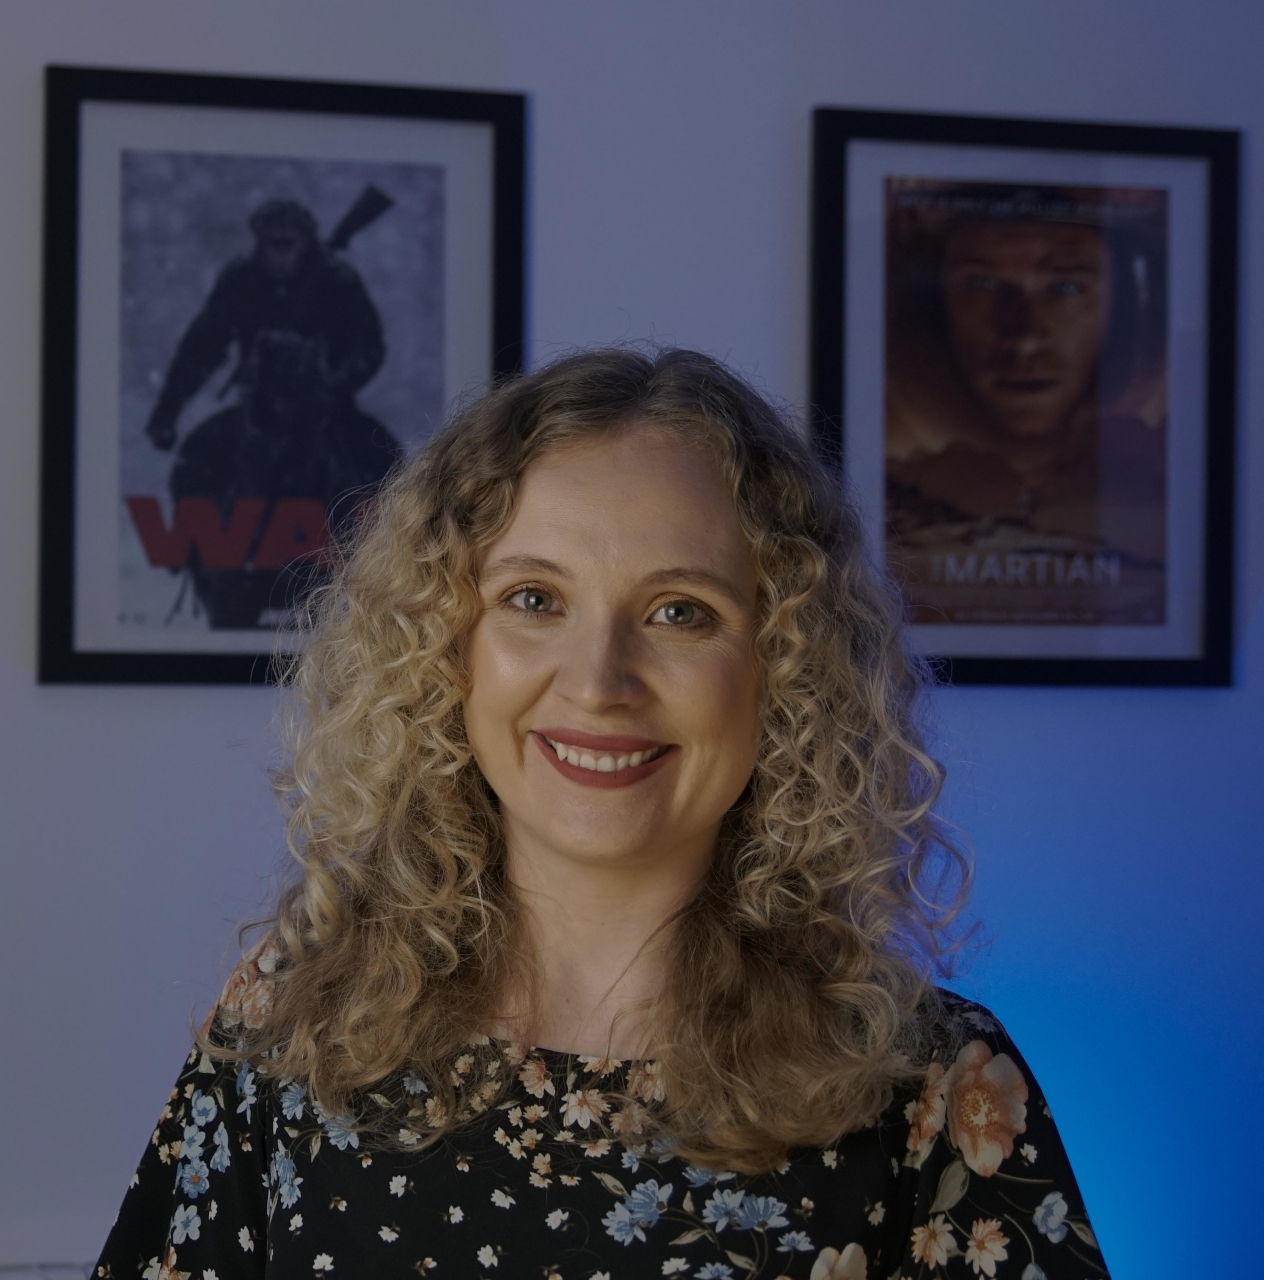 Victoria Burrows in front of TV posters